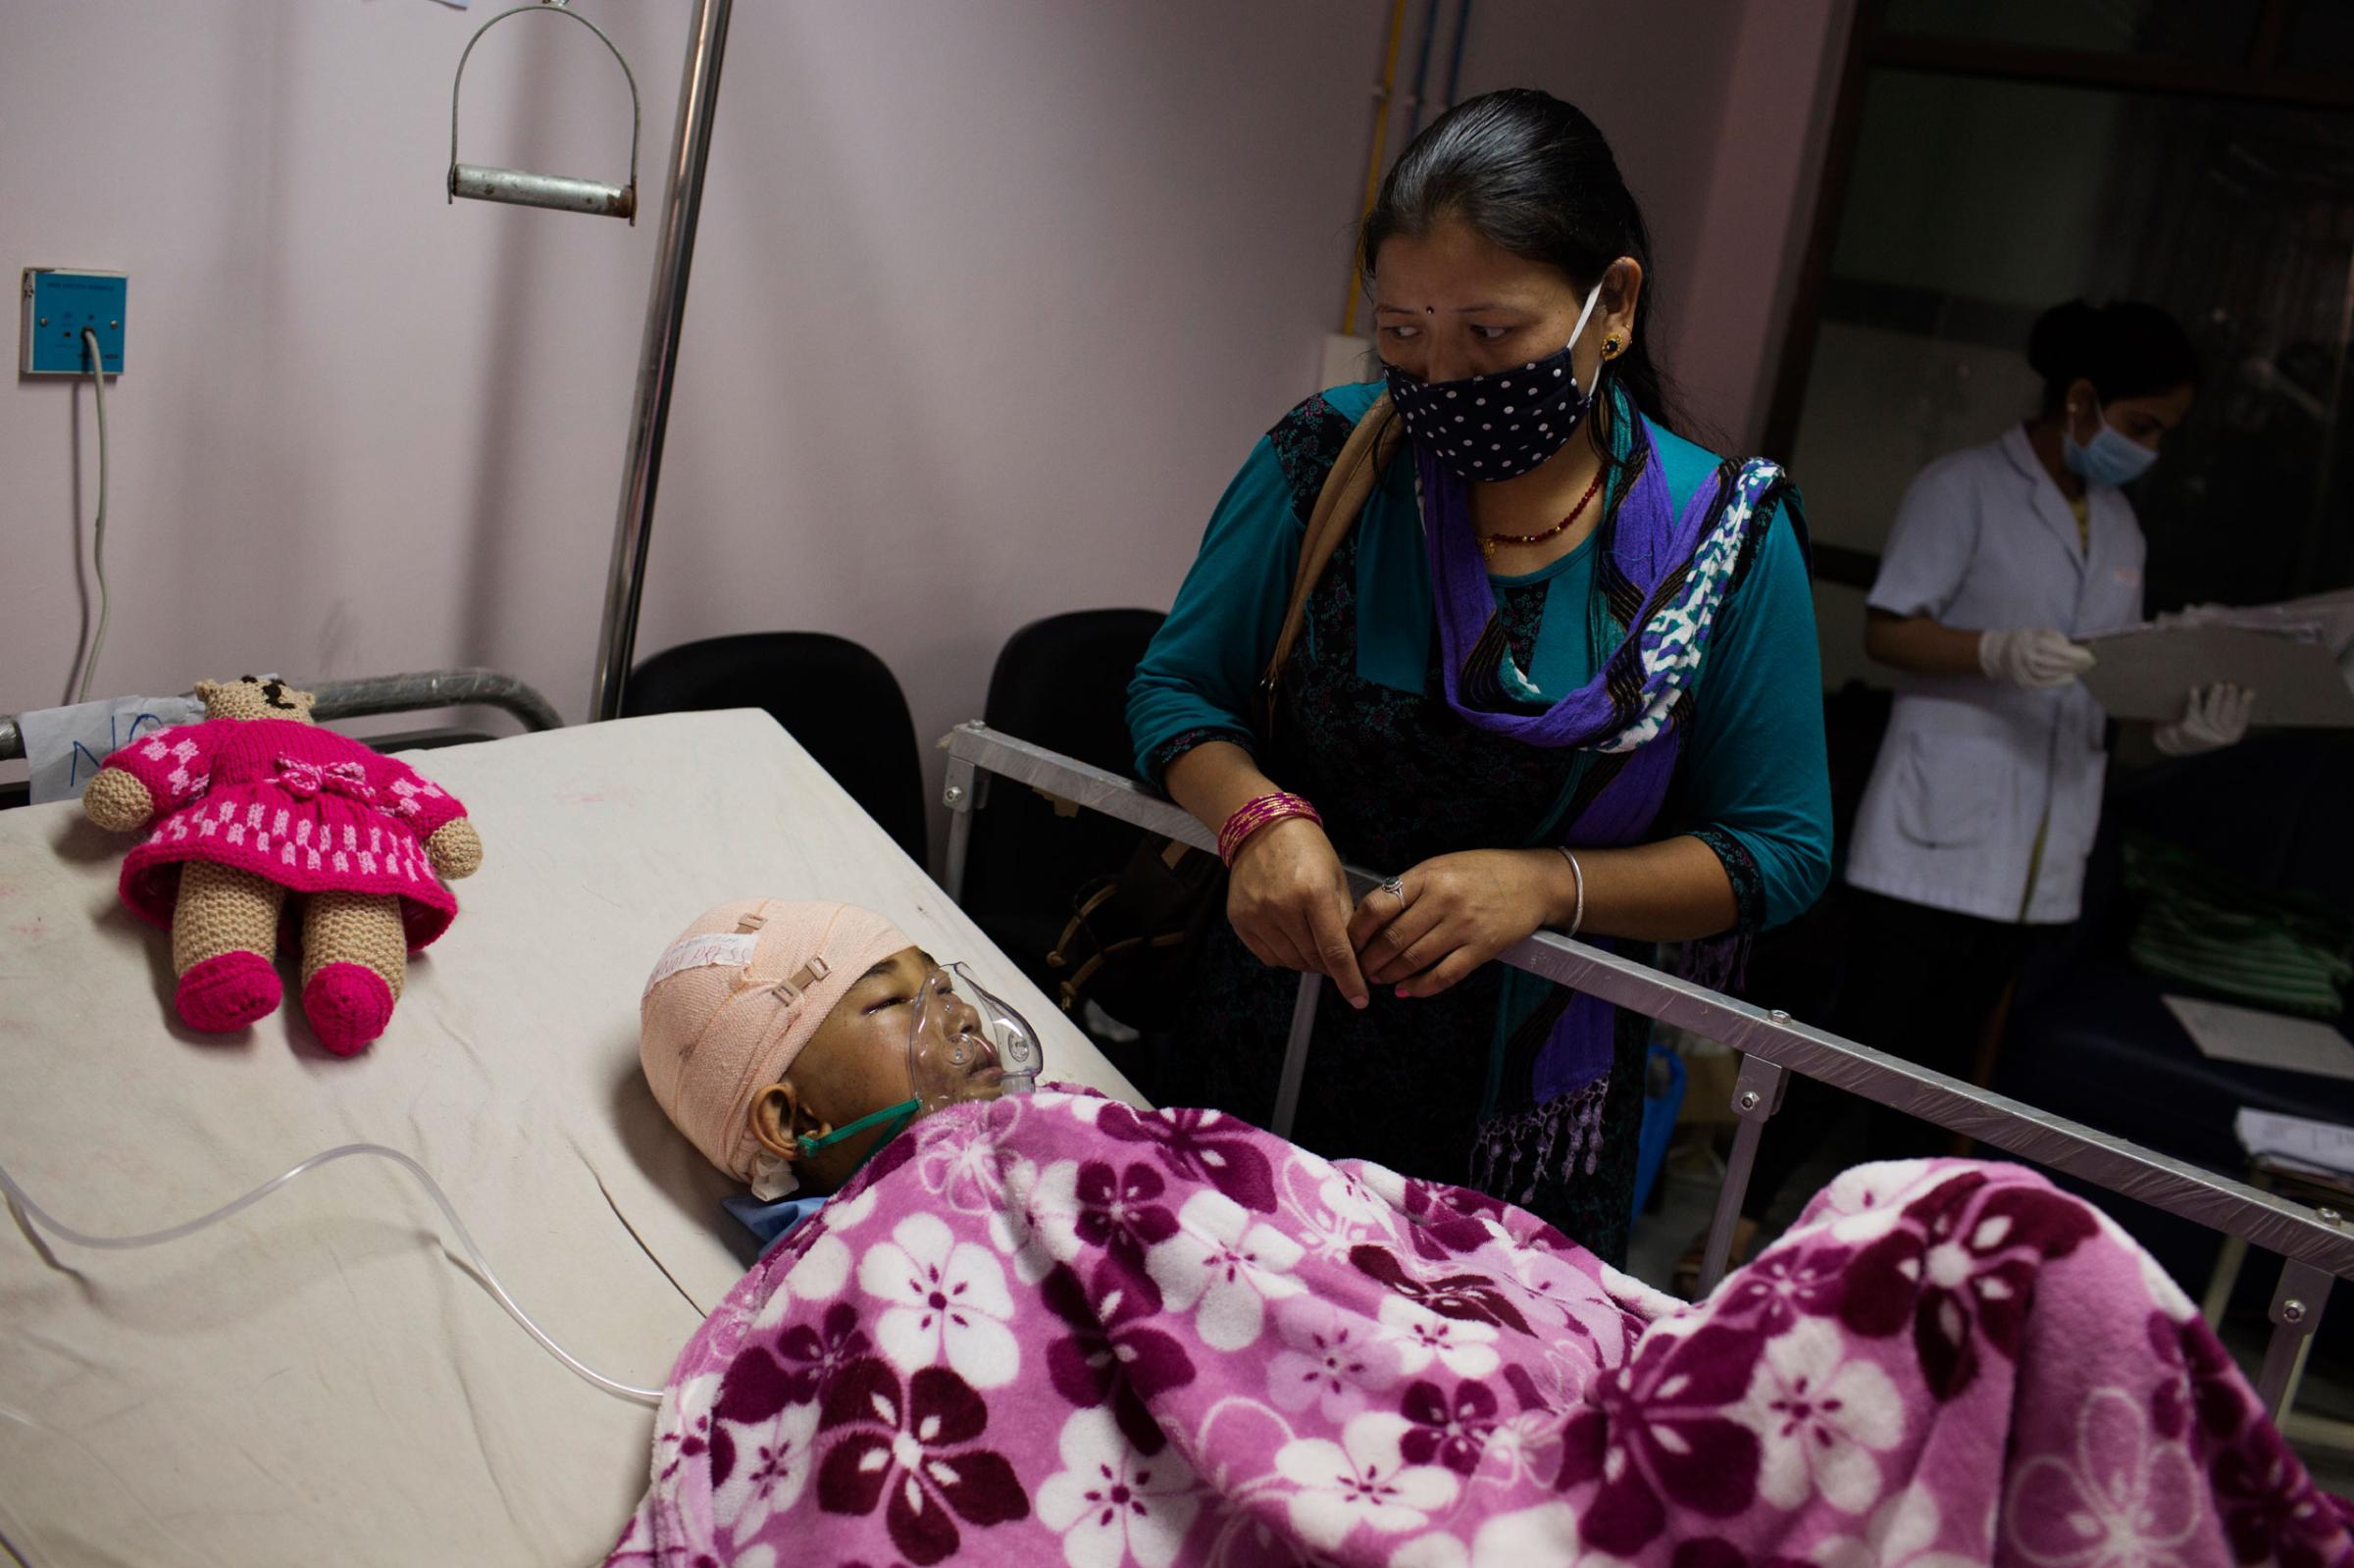 A mother looks at her son who was injured in the April 25th earthquake, at the Nepal and India Trauma Centre in Kathmandu, Nepal on April. 29, 2015. Photo by Adam Ferguson for Time